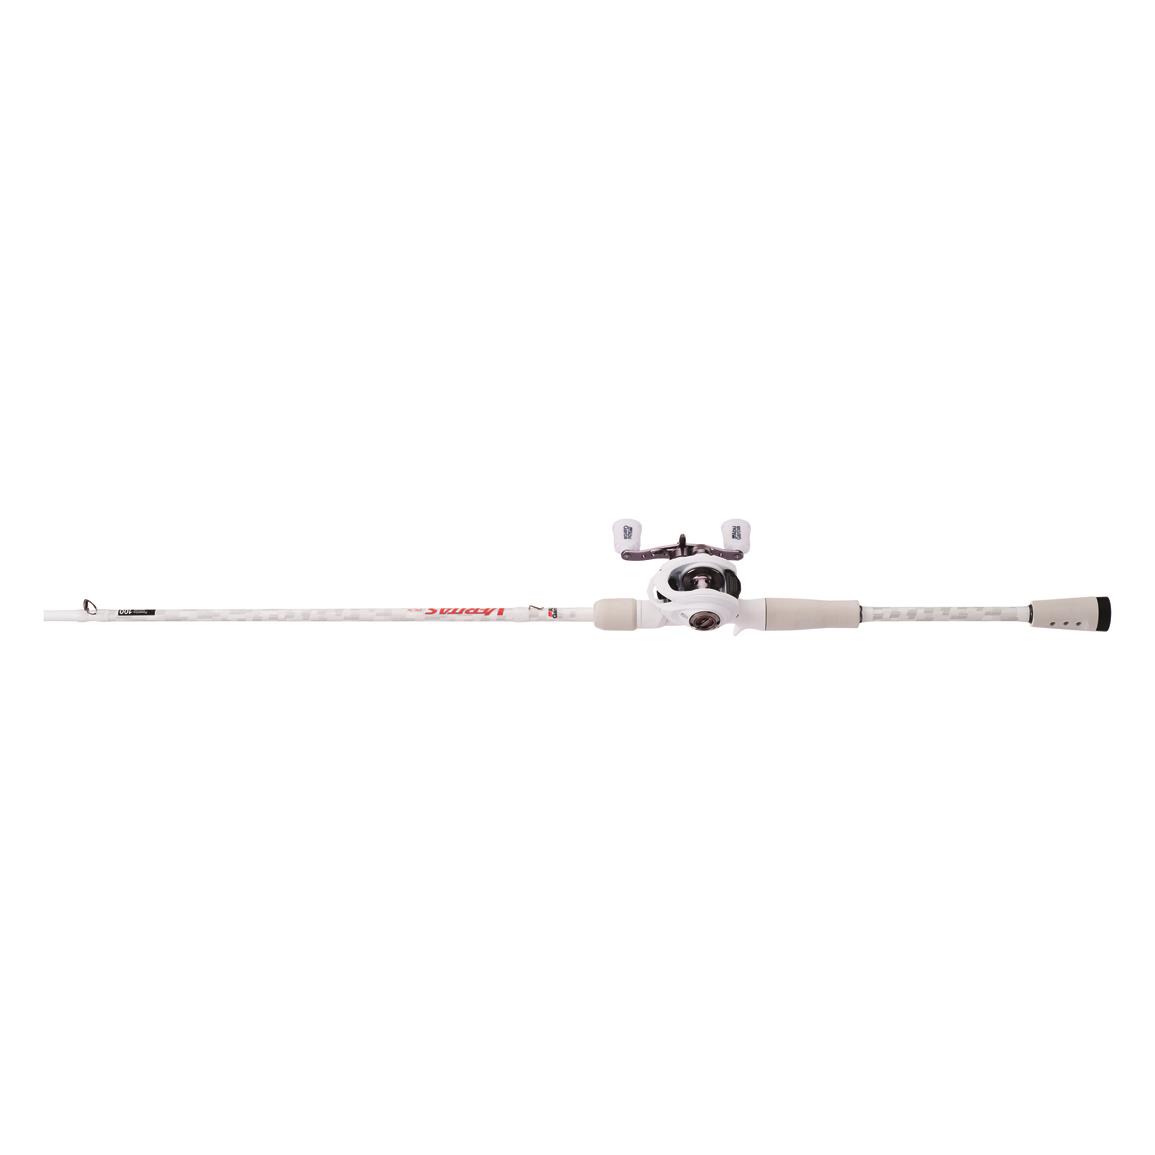 Abu Garcia Veritas Low Profile Baitcasting Combo, 7'3 Length, Heavy Power,  Fast Action - 726883, Casting Combos at Sportsman's Guide